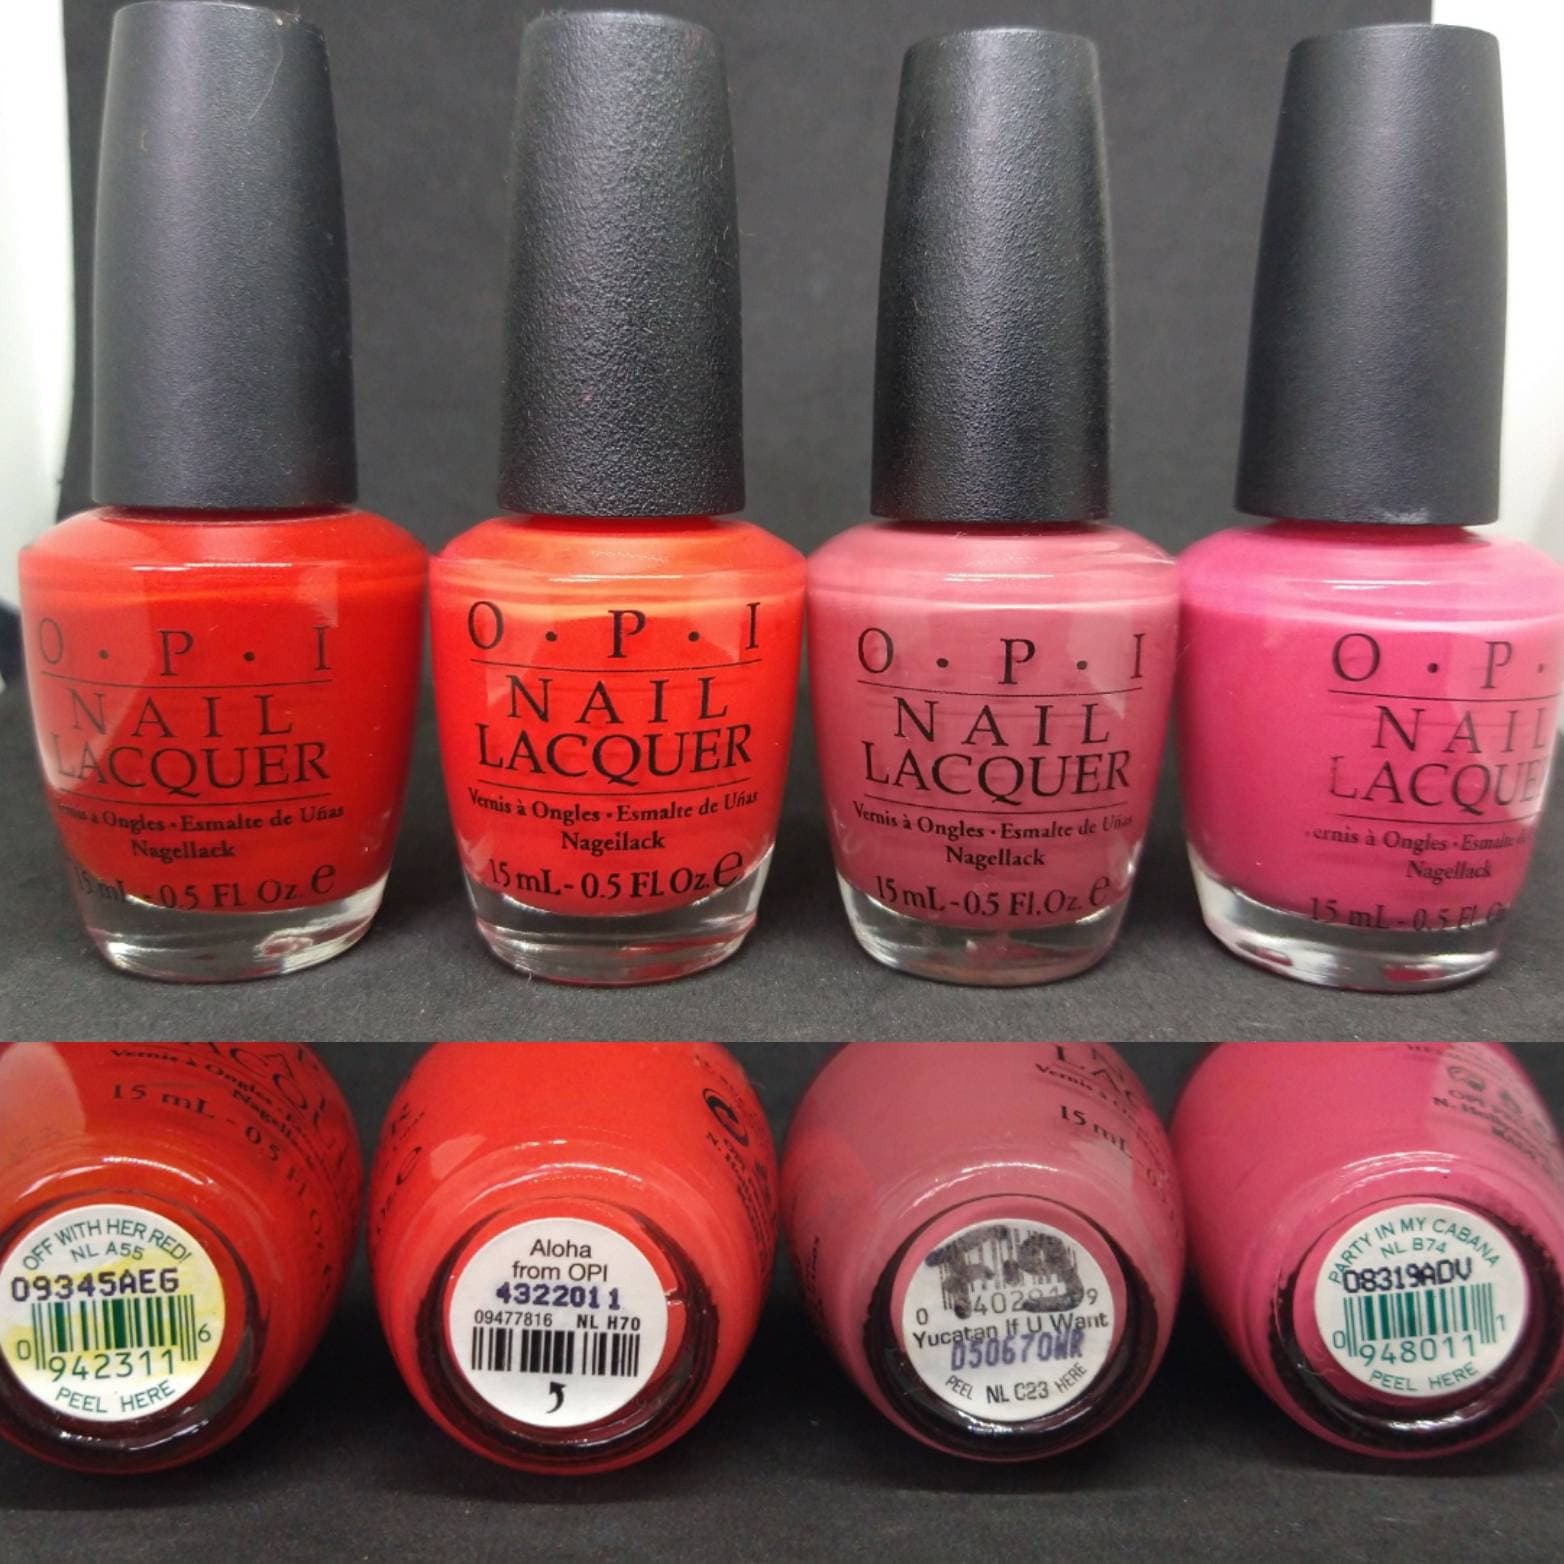 Shop OPI Products Online | Diamond Nail Supplies